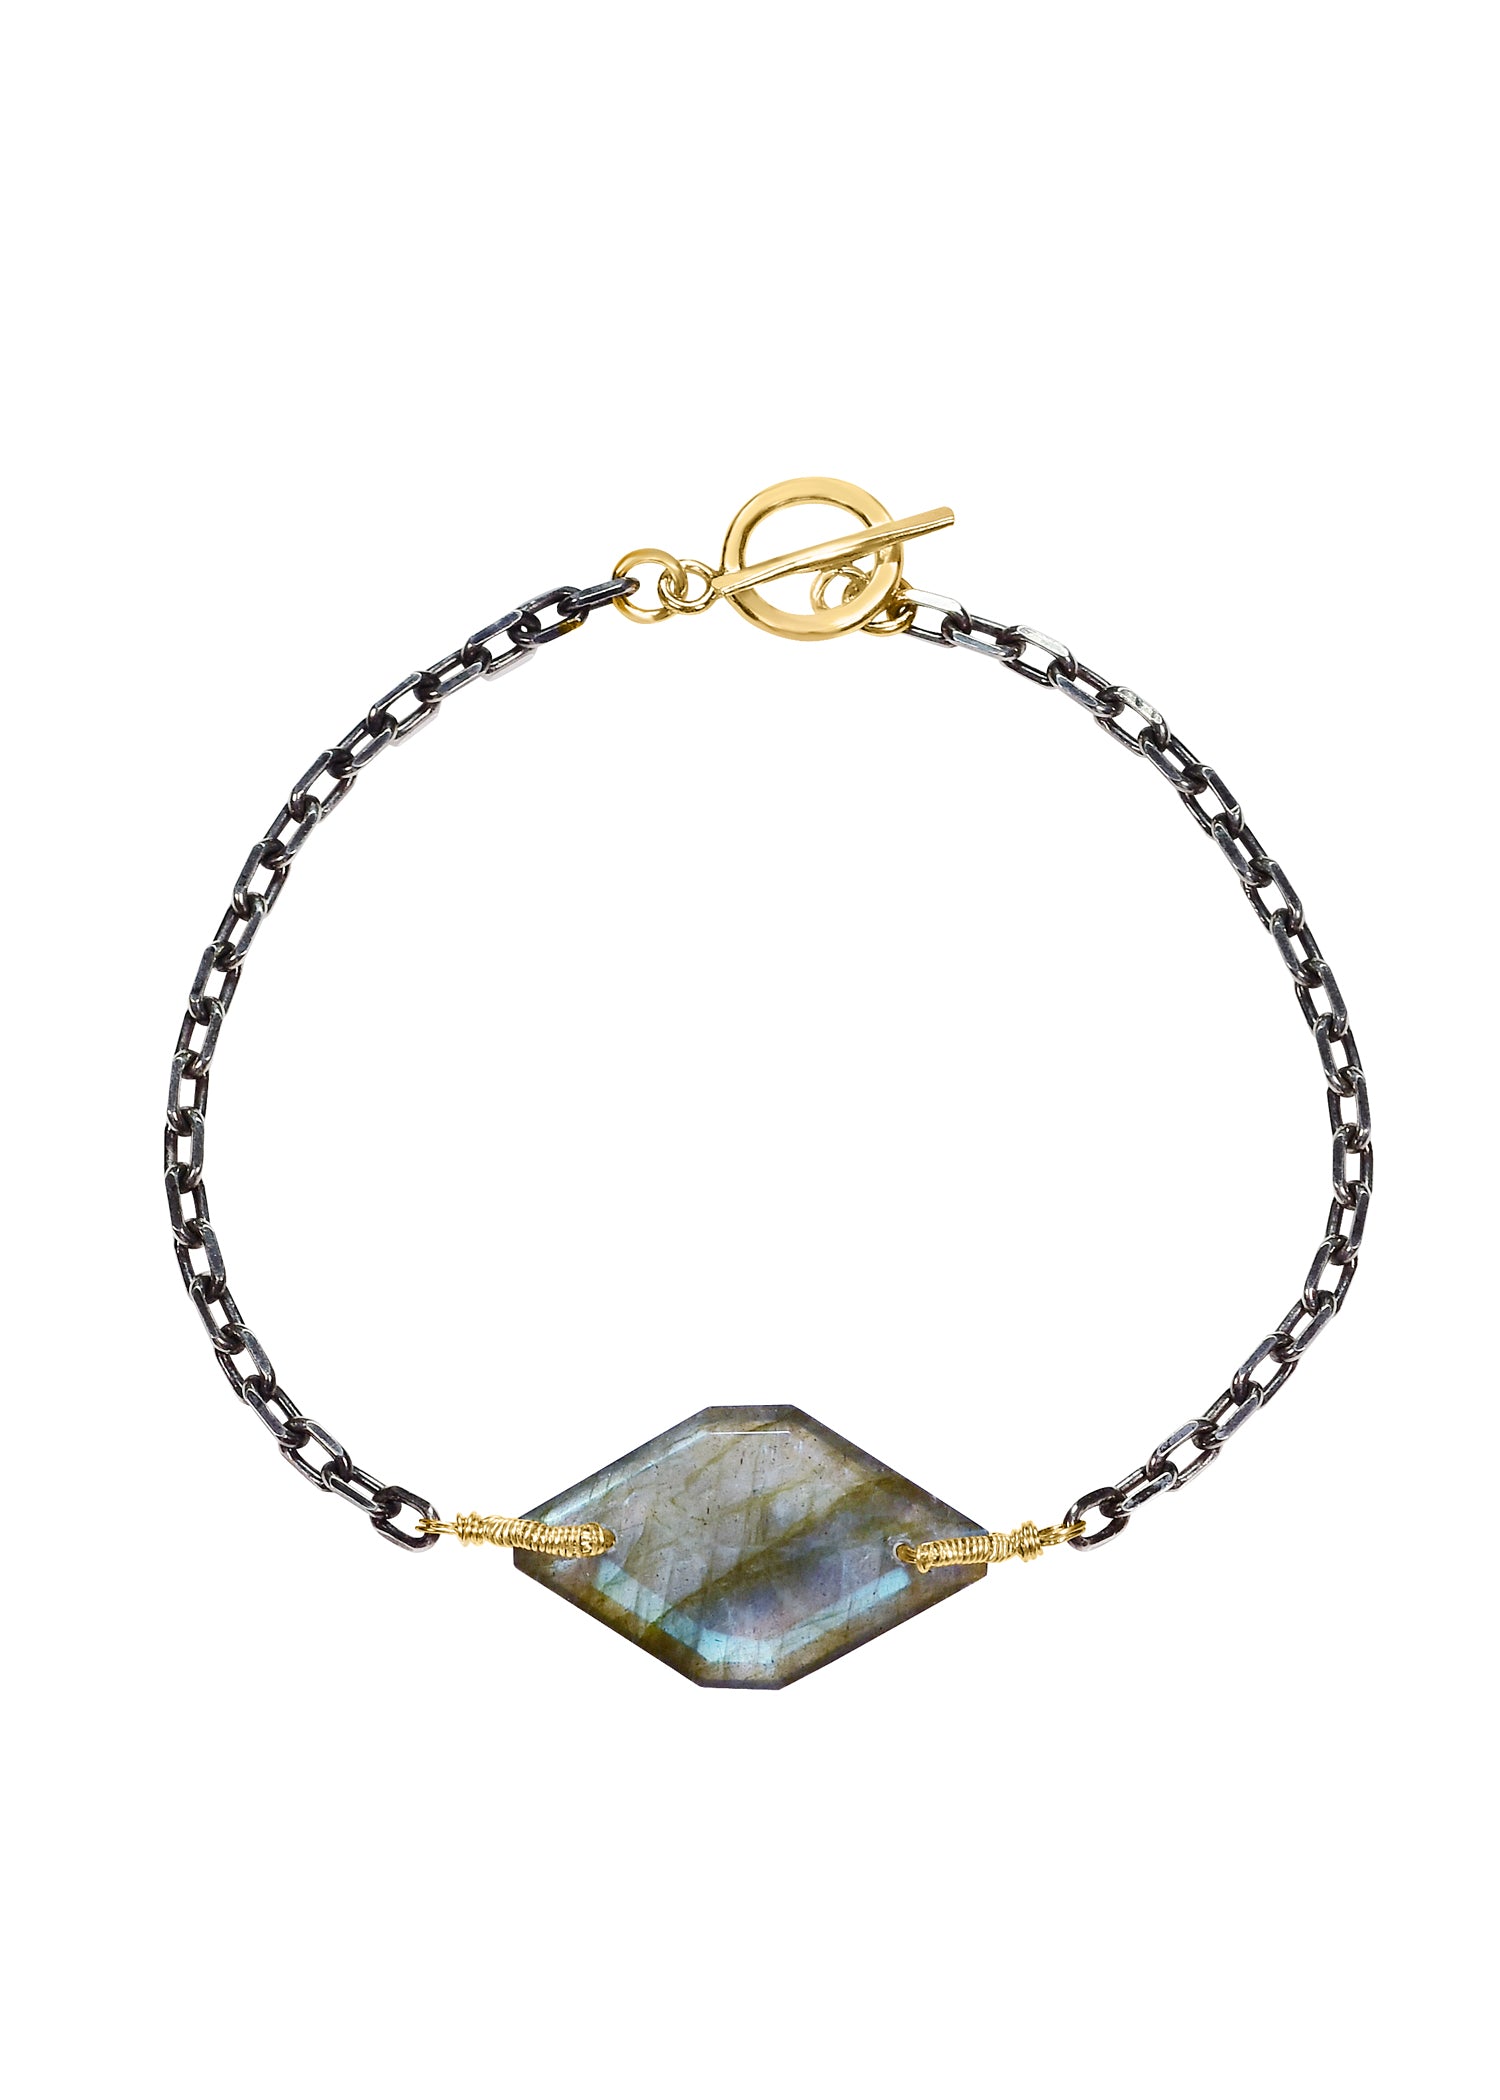 Labradorite Mixed Metal 14k gold fill Sterling Silver Pendant measures 7/8" in length and 1/2" in width Total length is 7" Handmade in our Los Angeles studio